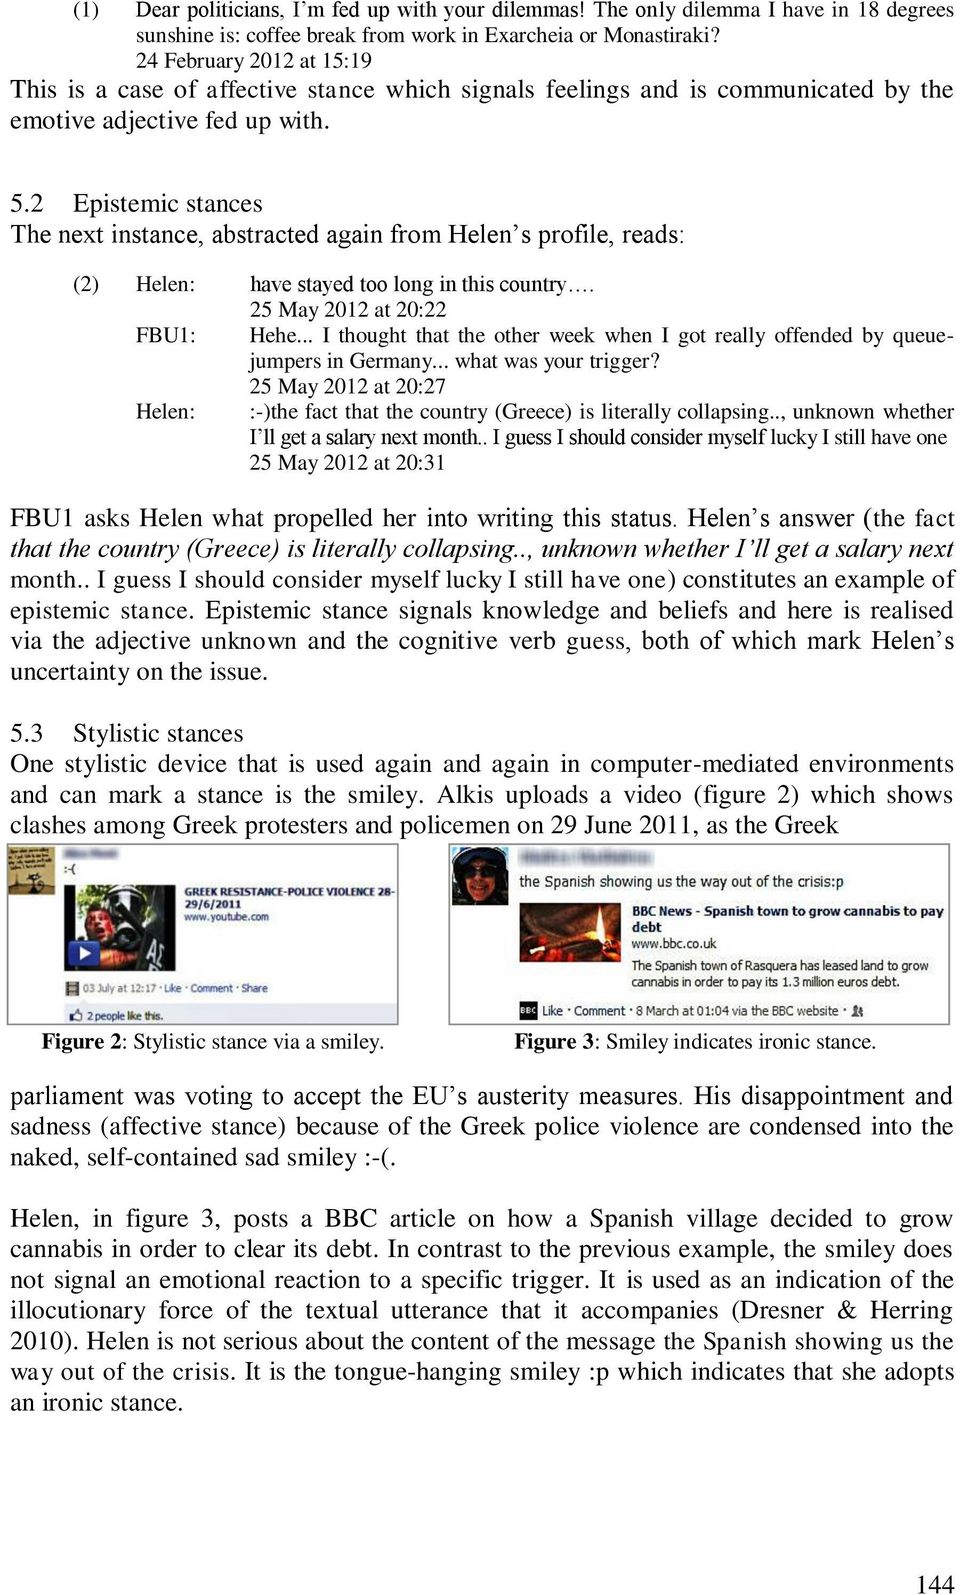 2 Epistemic stances The next instance, abstracted again from Helen s profile, reads: (2) Helen: have stayed too long in this country. 25 May 2012 at 20:22 FBU1: Hehe.